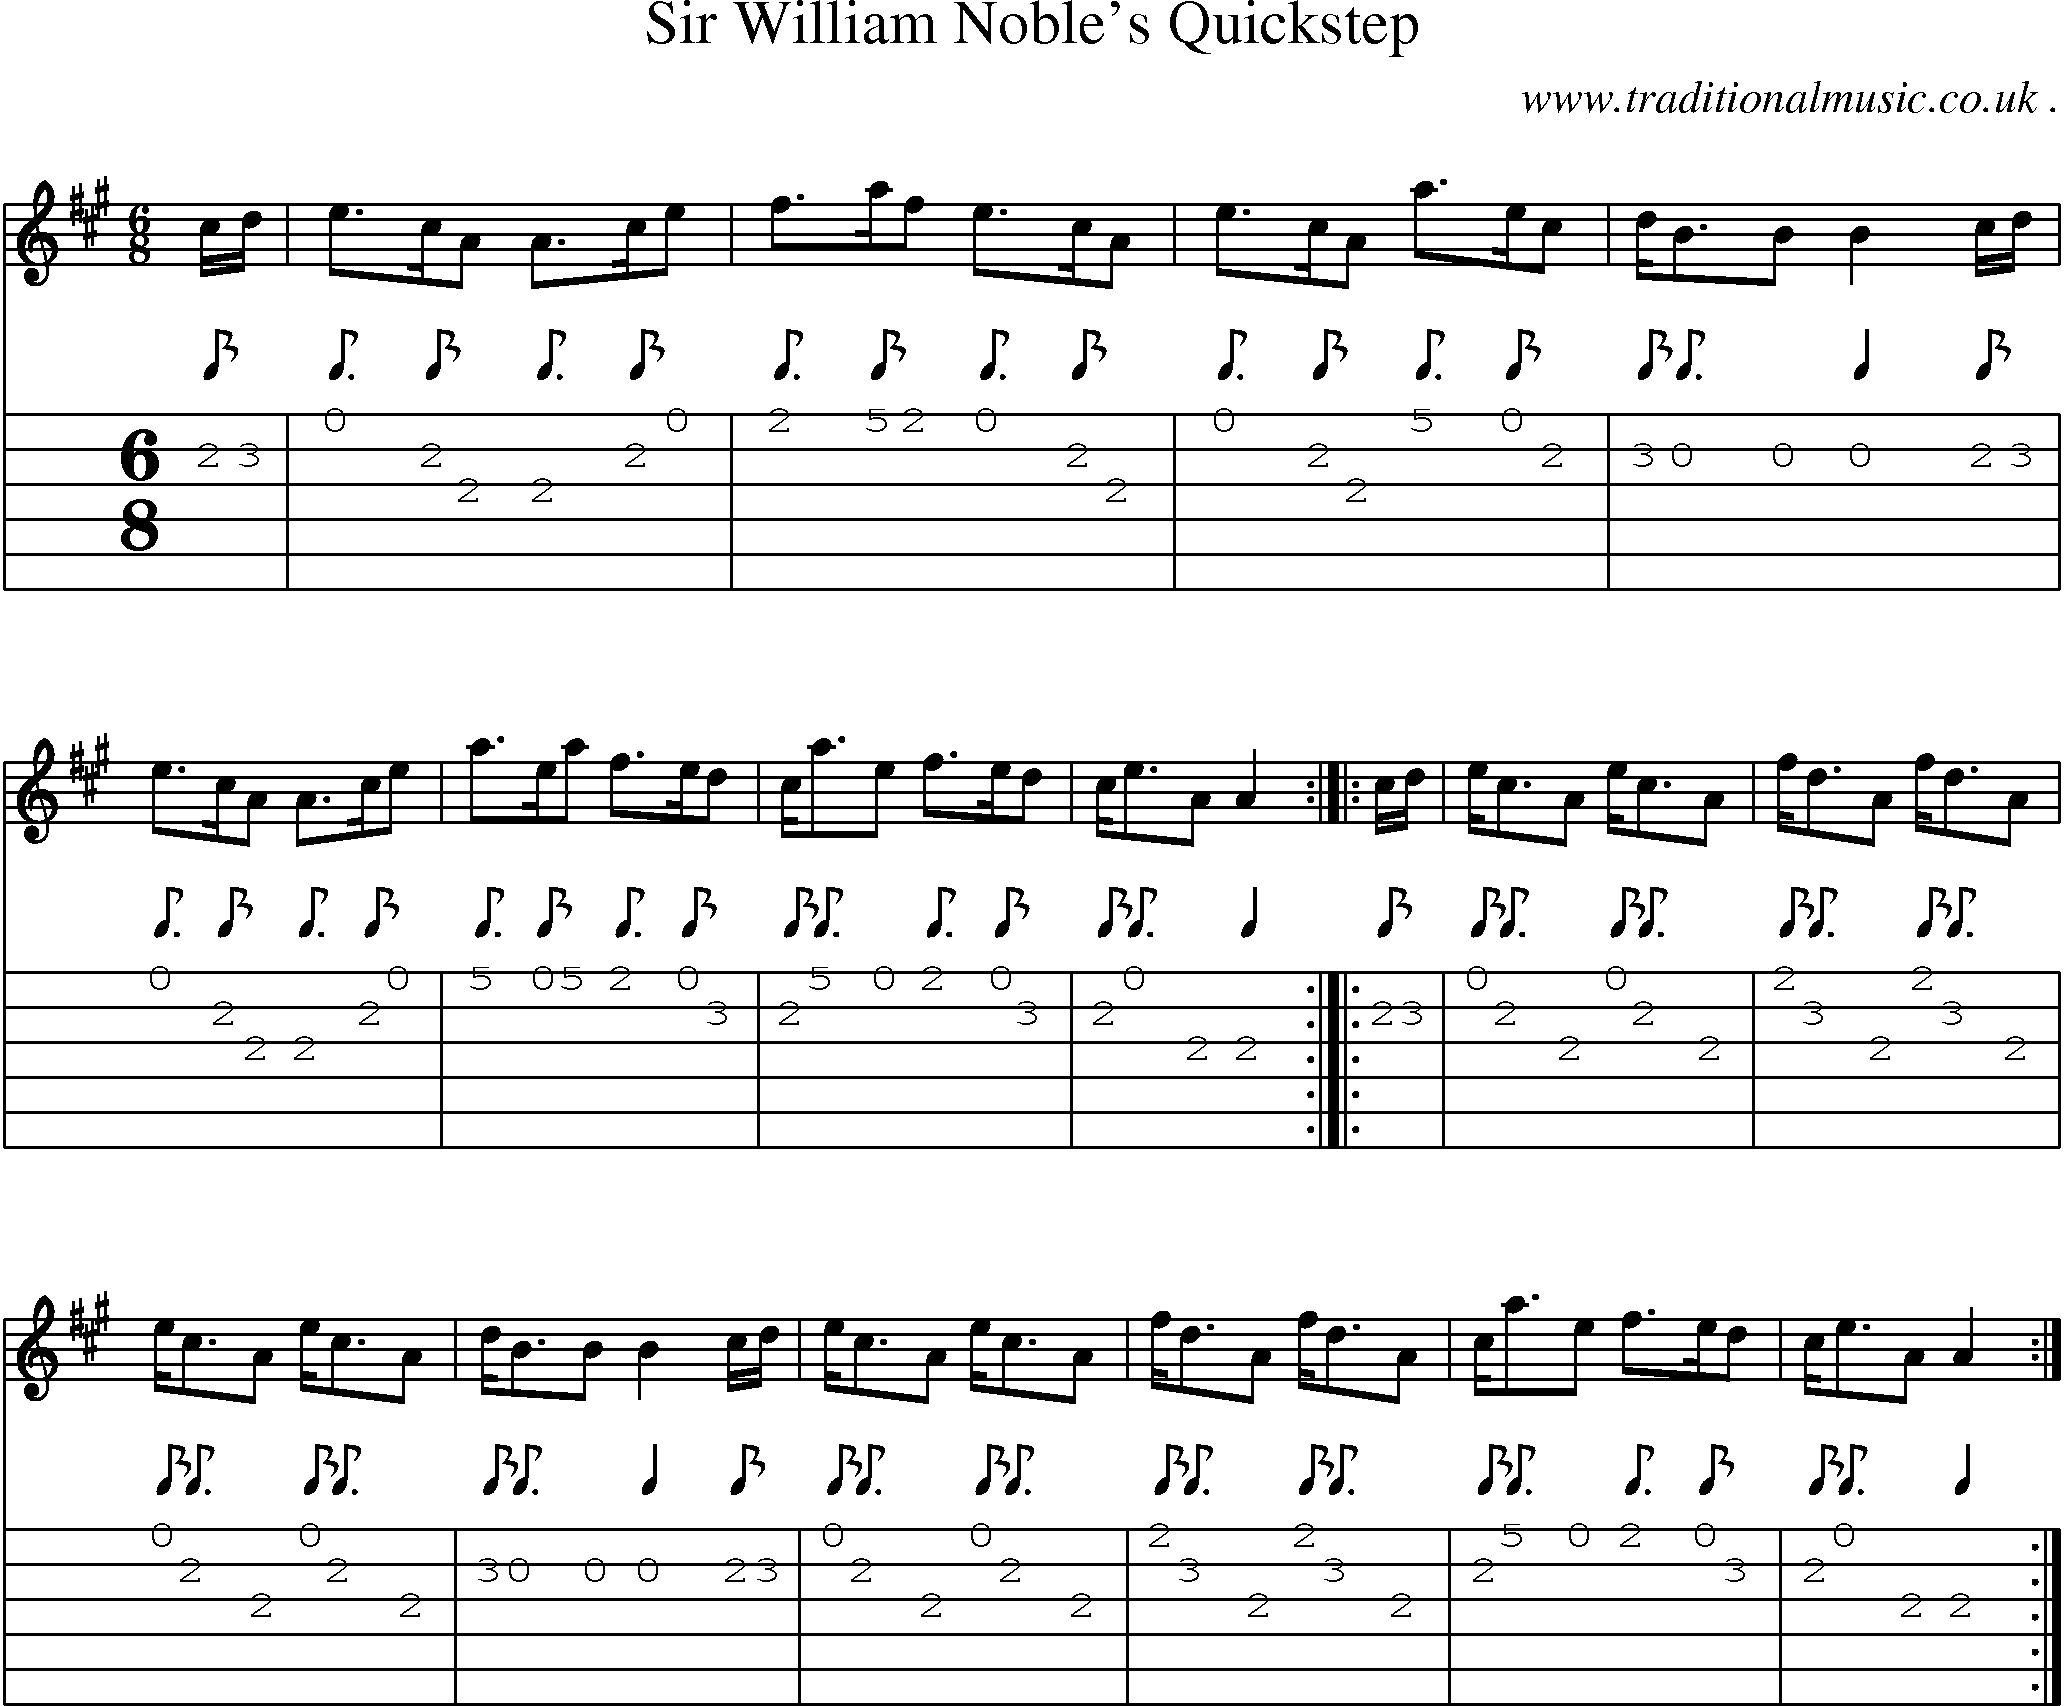 Sheet-music  score, Chords and Guitar Tabs for Sir William Nobles Quickstep